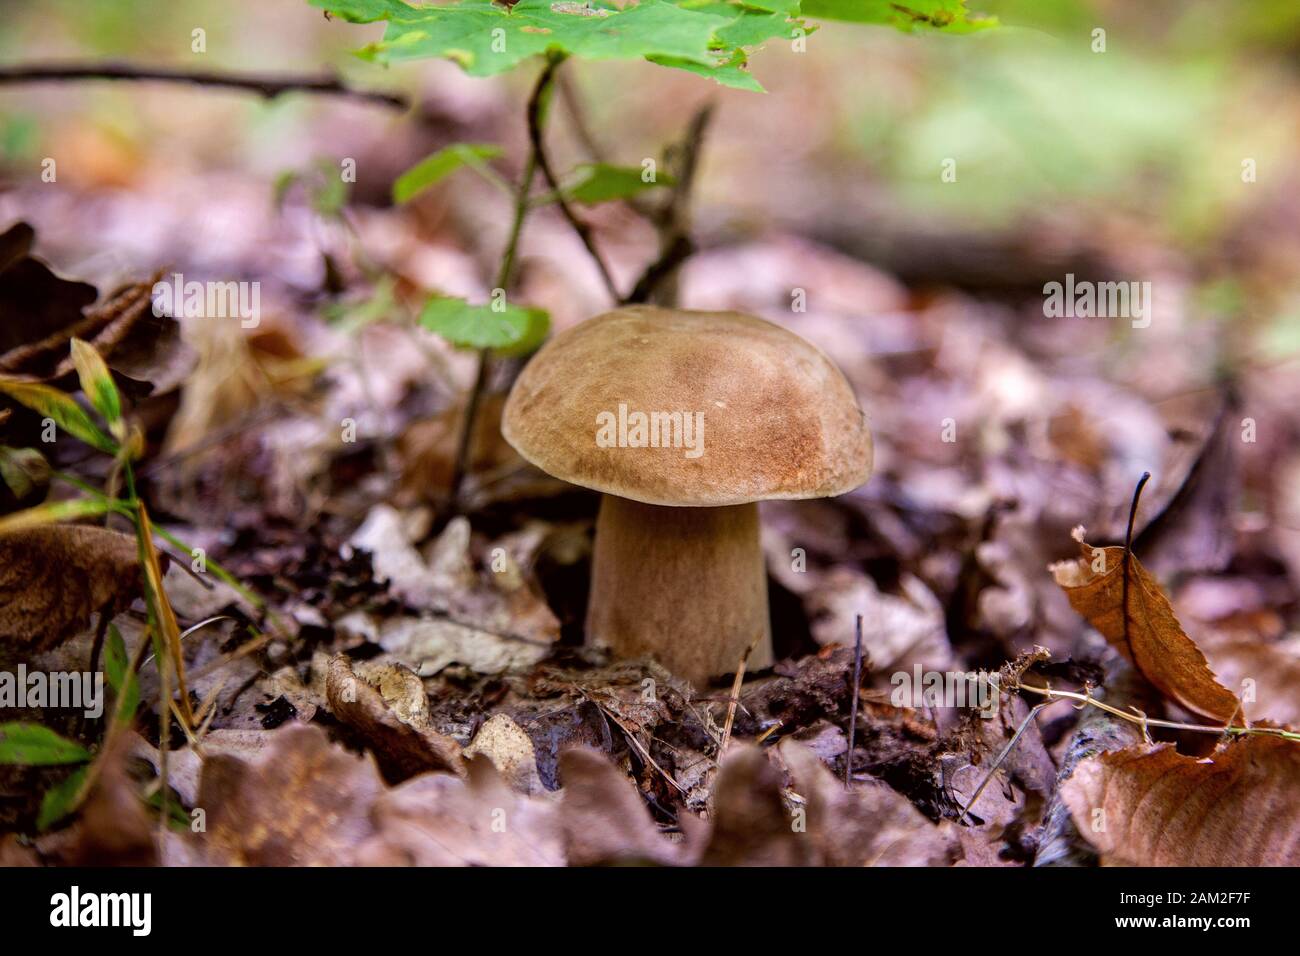 Boletus edulis (cep, penny bun, porcino or king bolete, usually called porcini mushroom) grows on the forest floor among moss and dry fallen leaves at Stock Photo